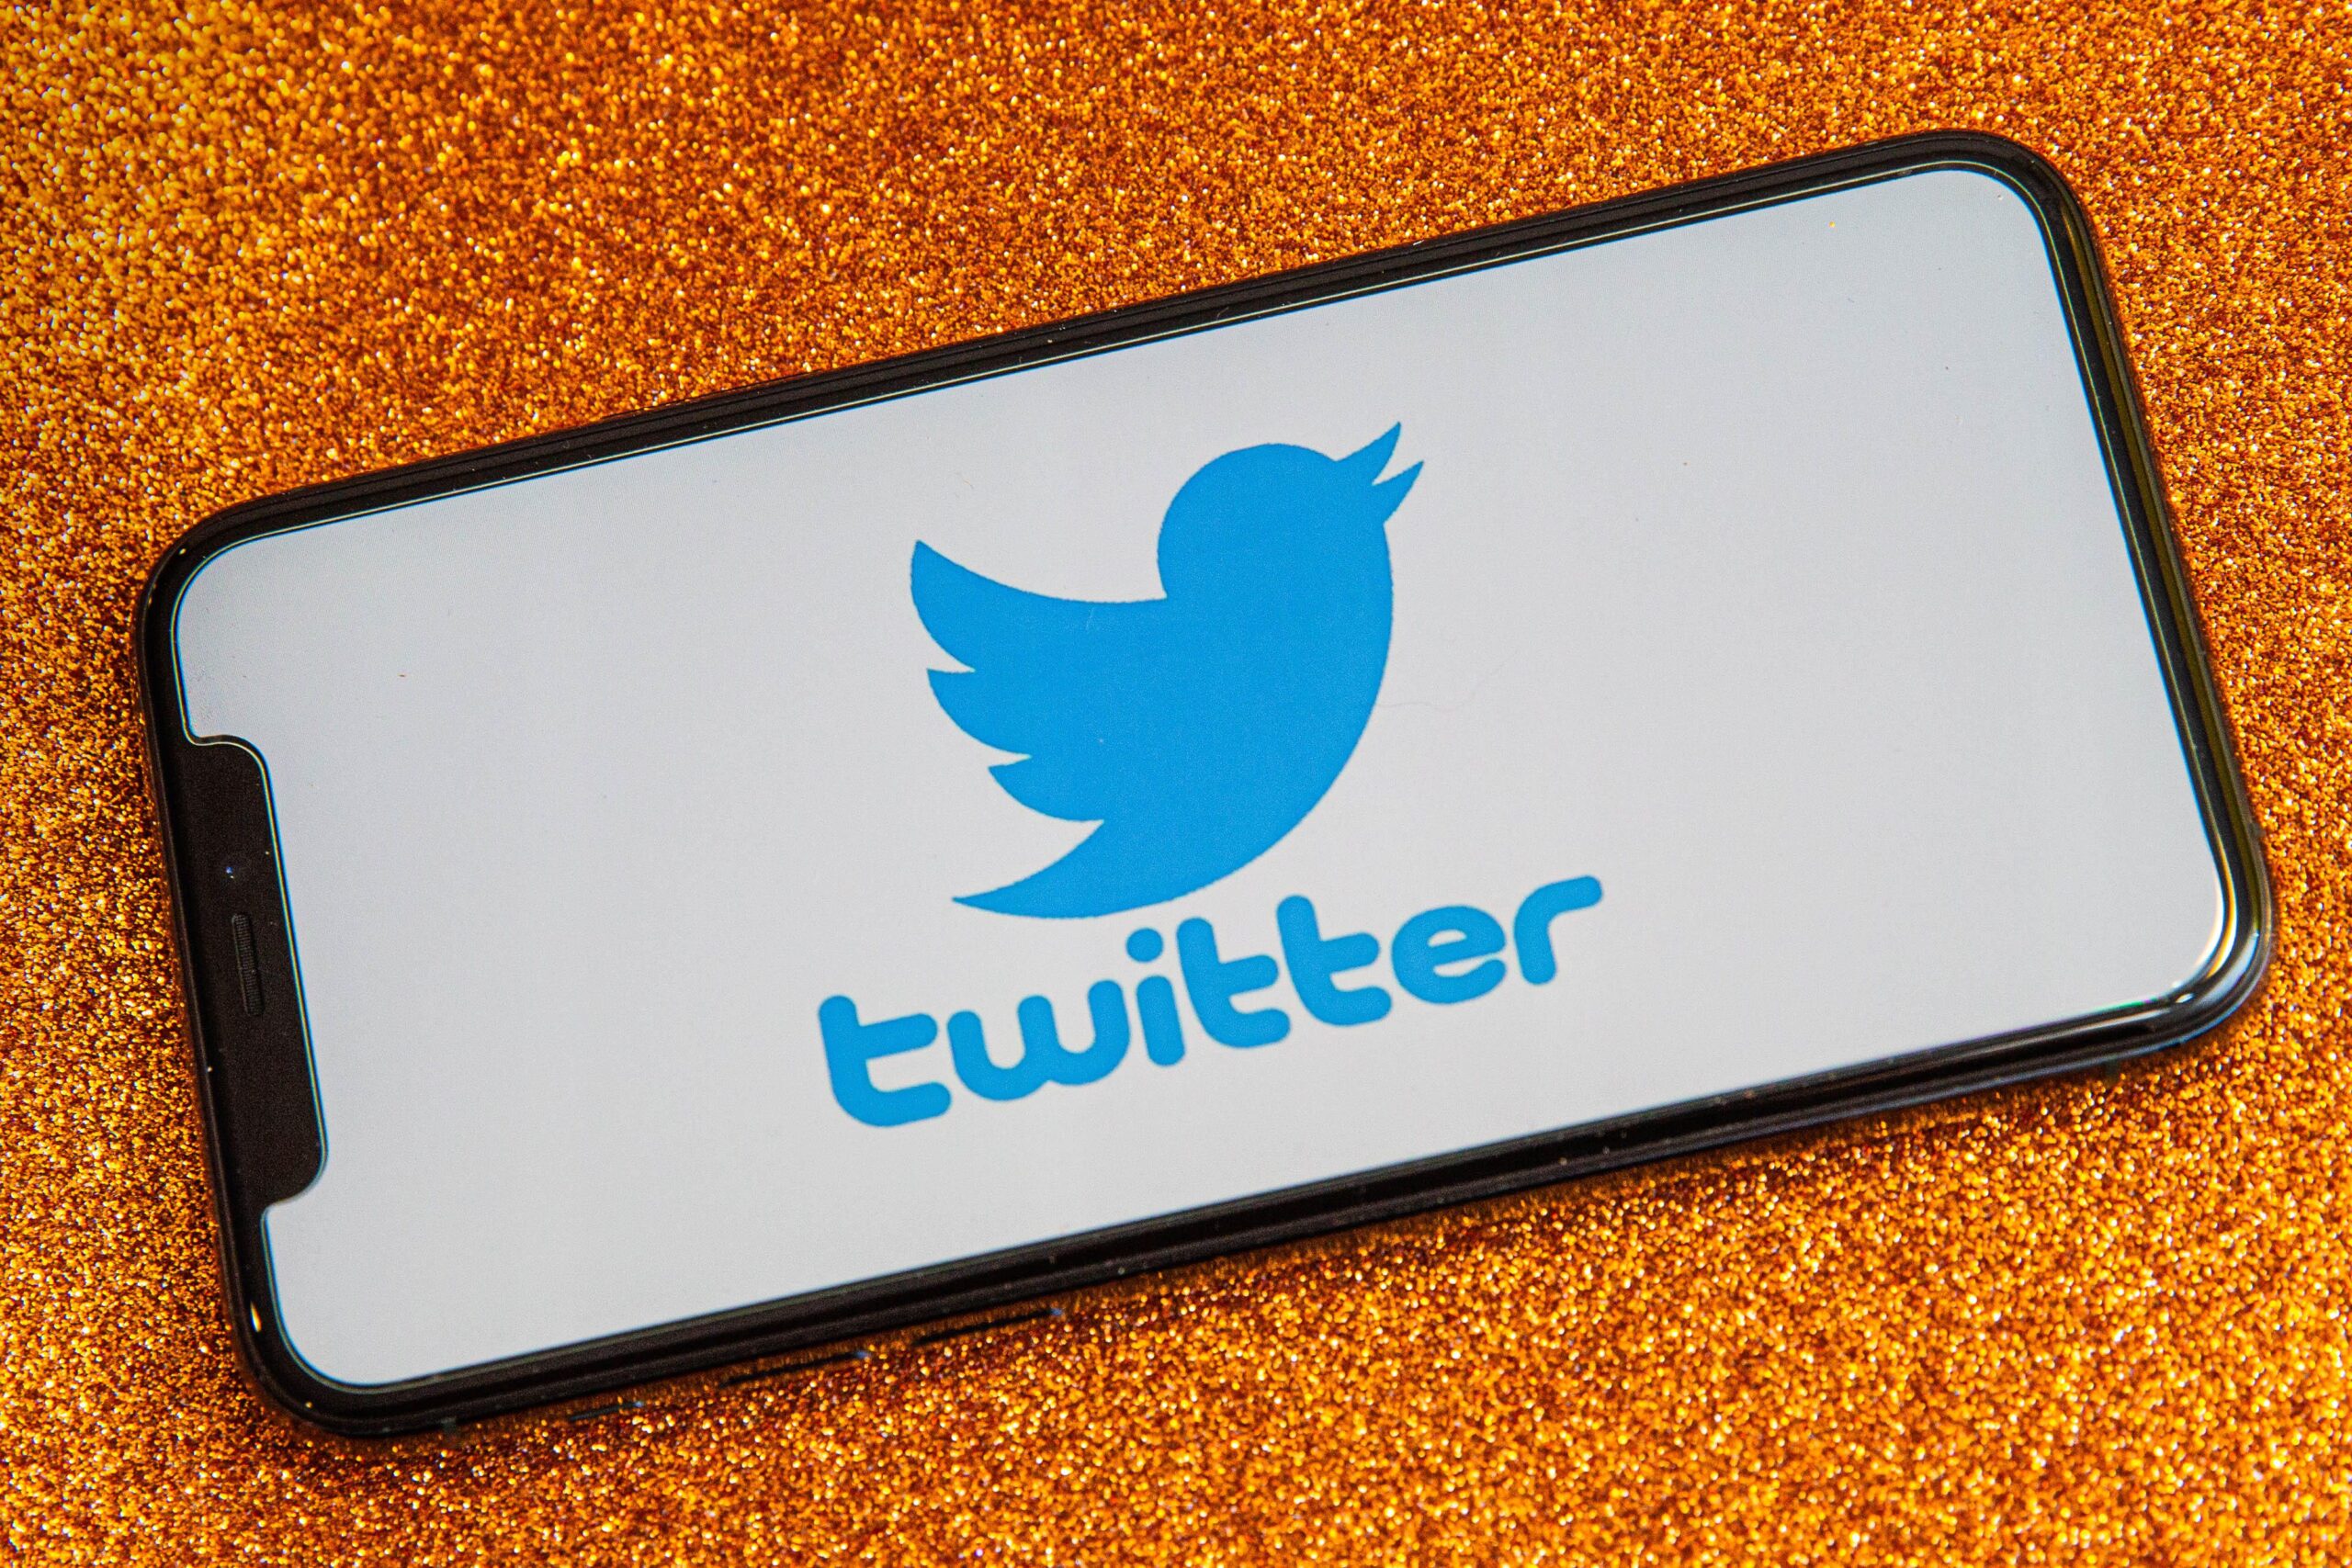 Twitter Recently Enables Tabbed Option To Toggle Between Home And Latest Tweets